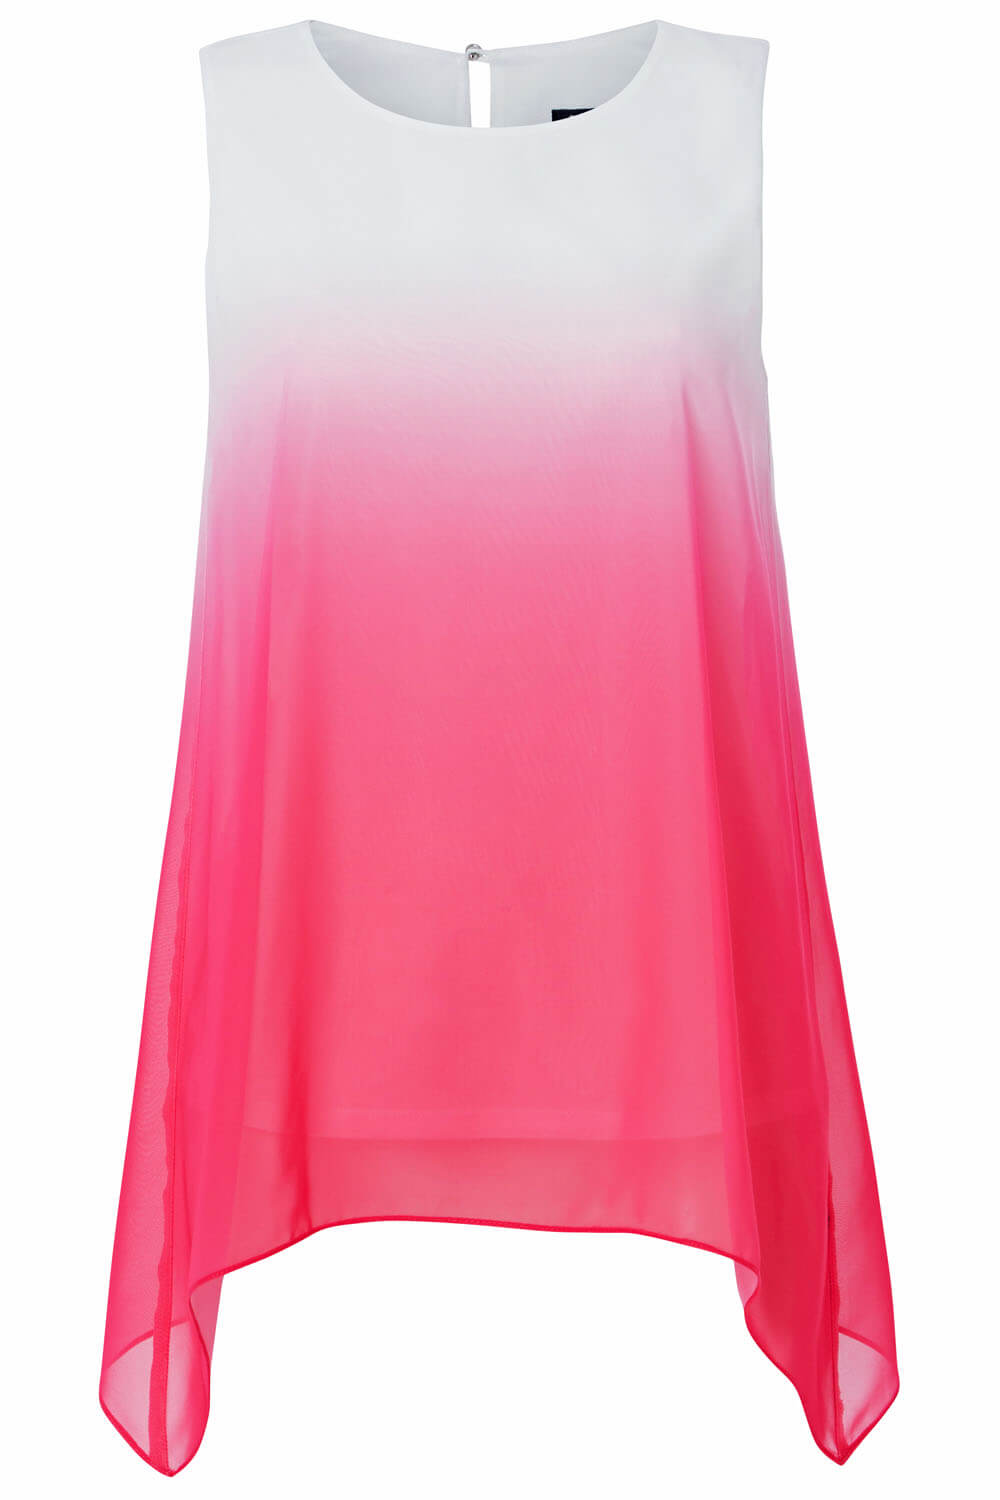 PINK Ombre Print Overlay Top, Image 4 of 8